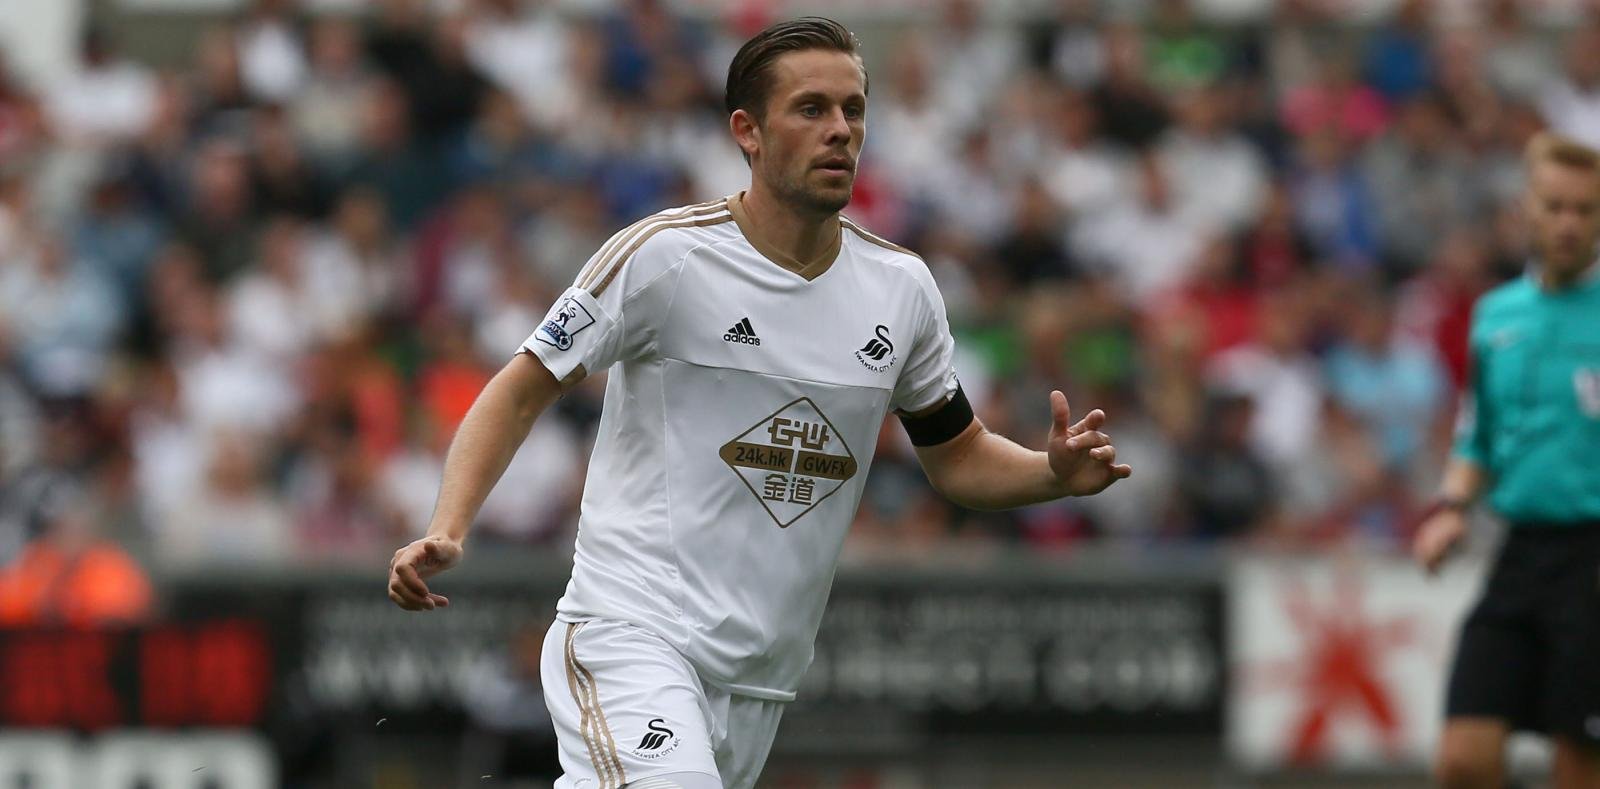 Where’s the real Gylfi gone?